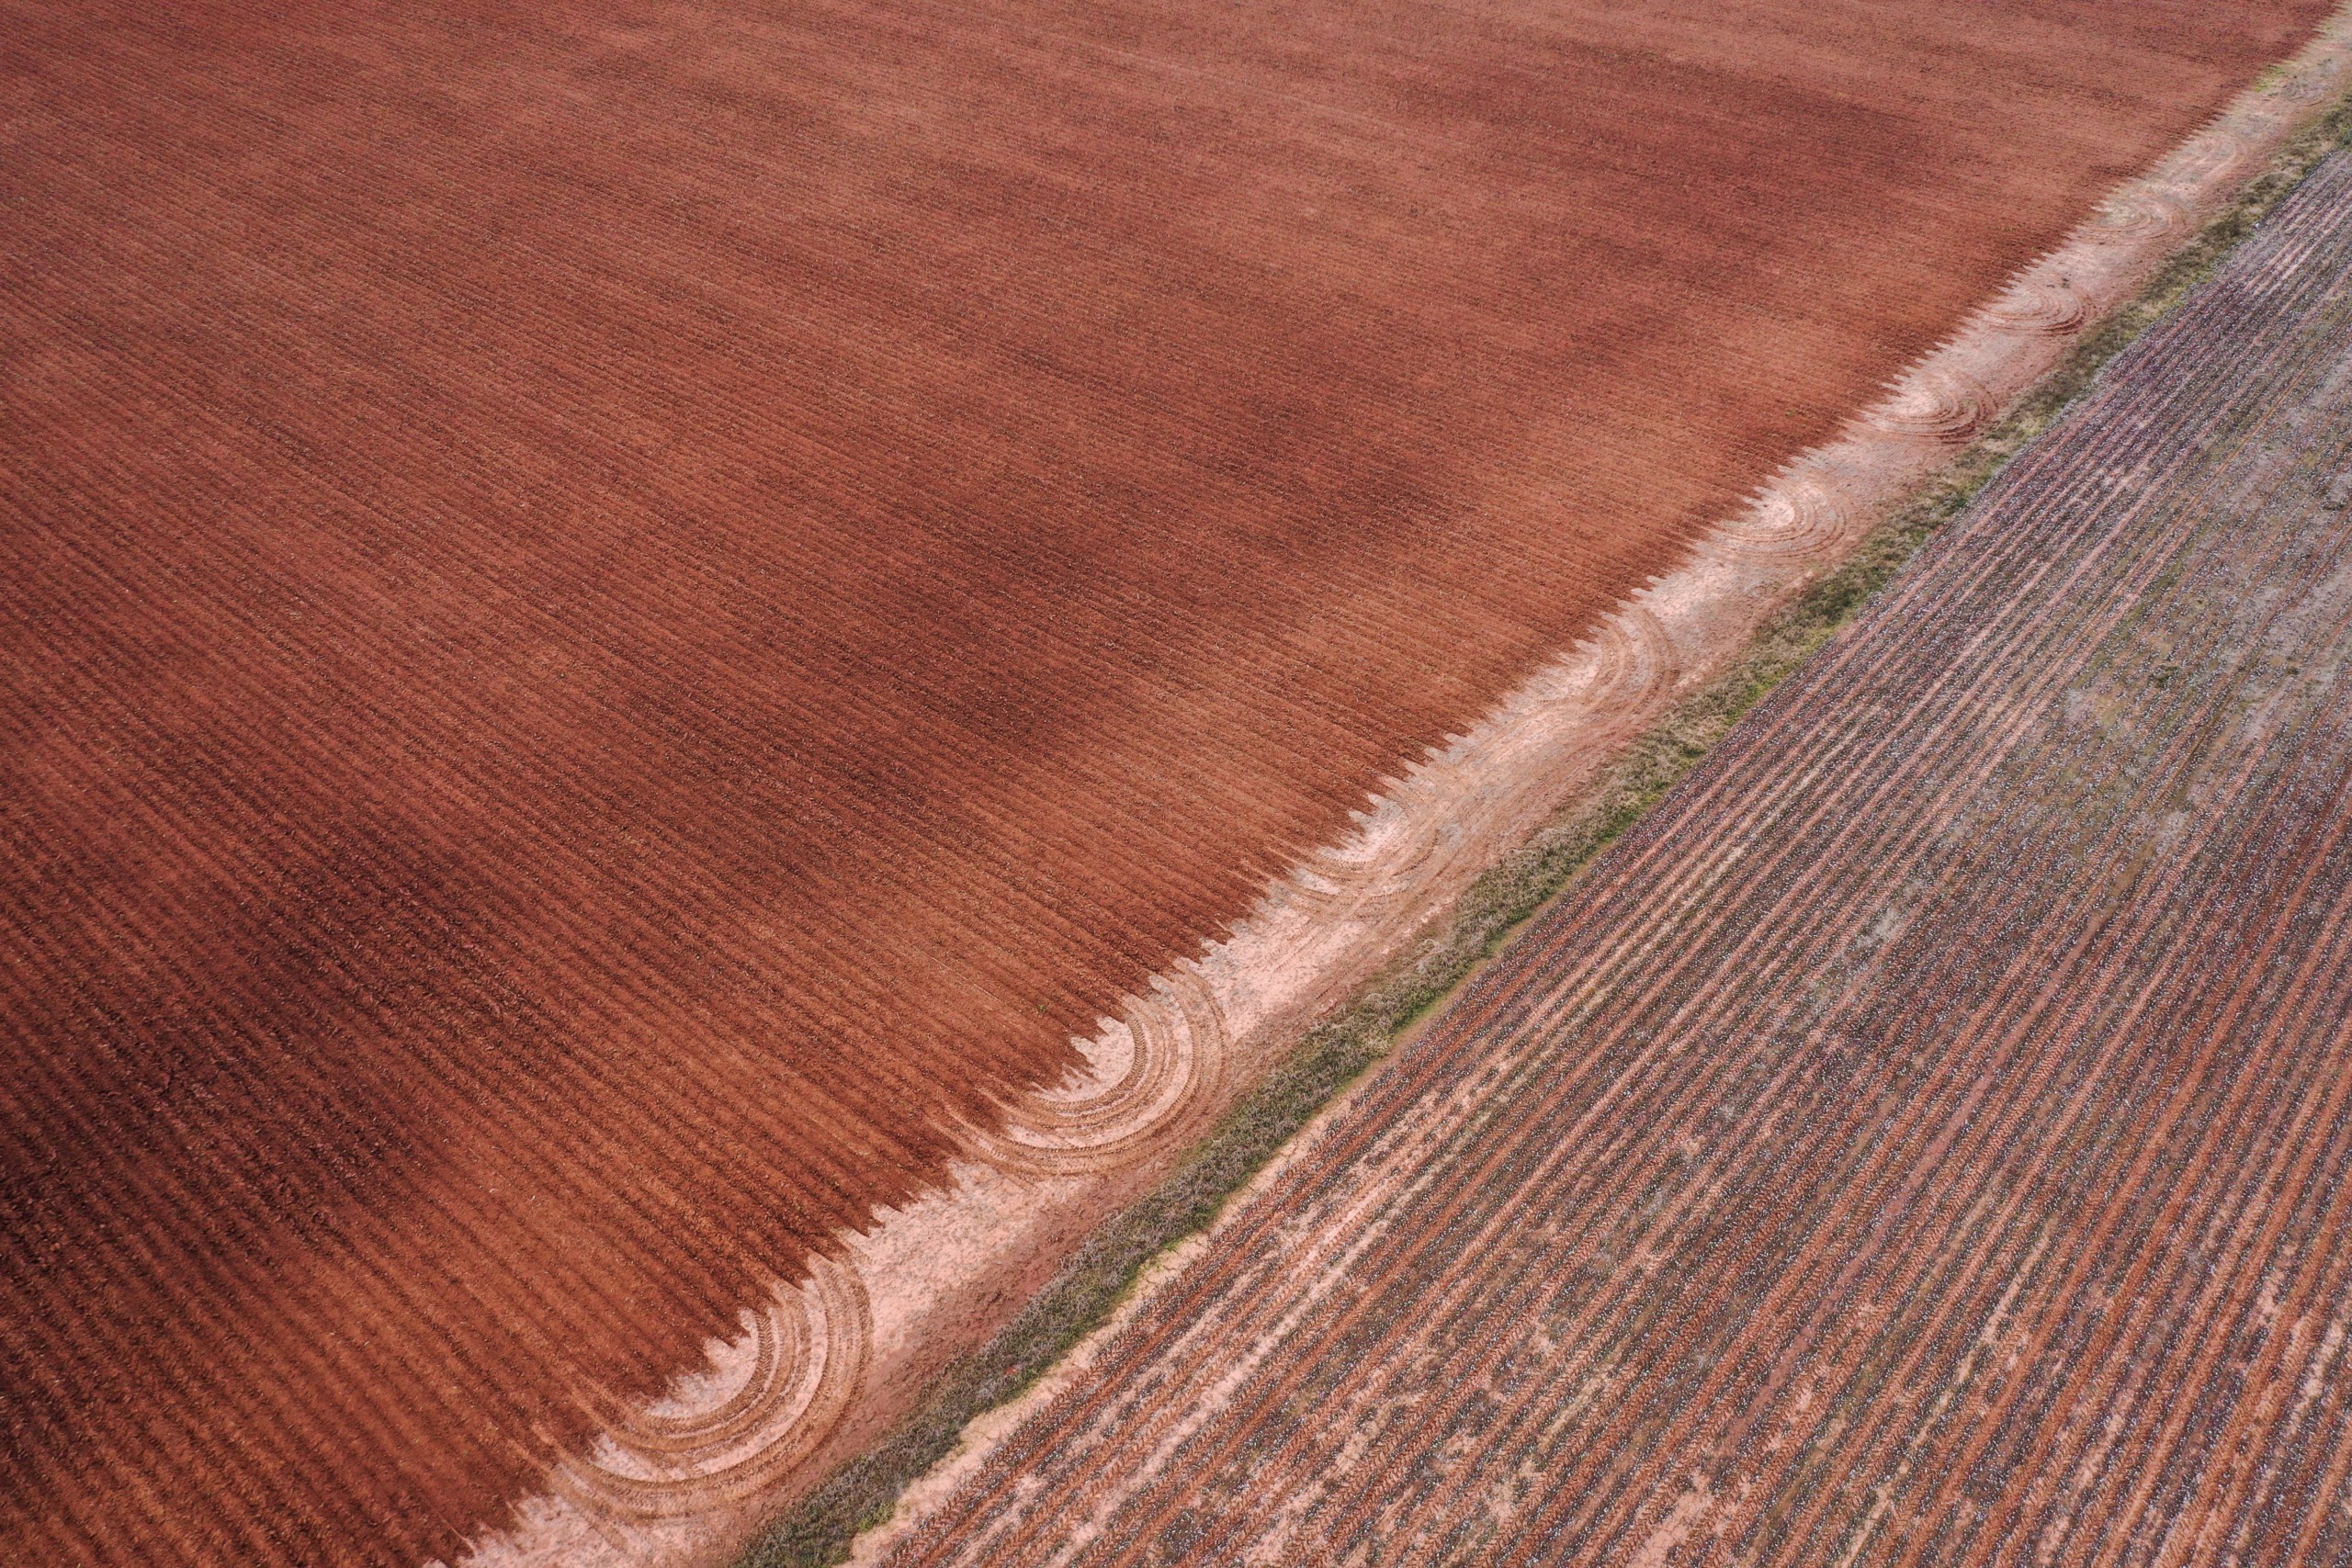 Freshly tilled red clay soil near Cloutierville, Louisiana